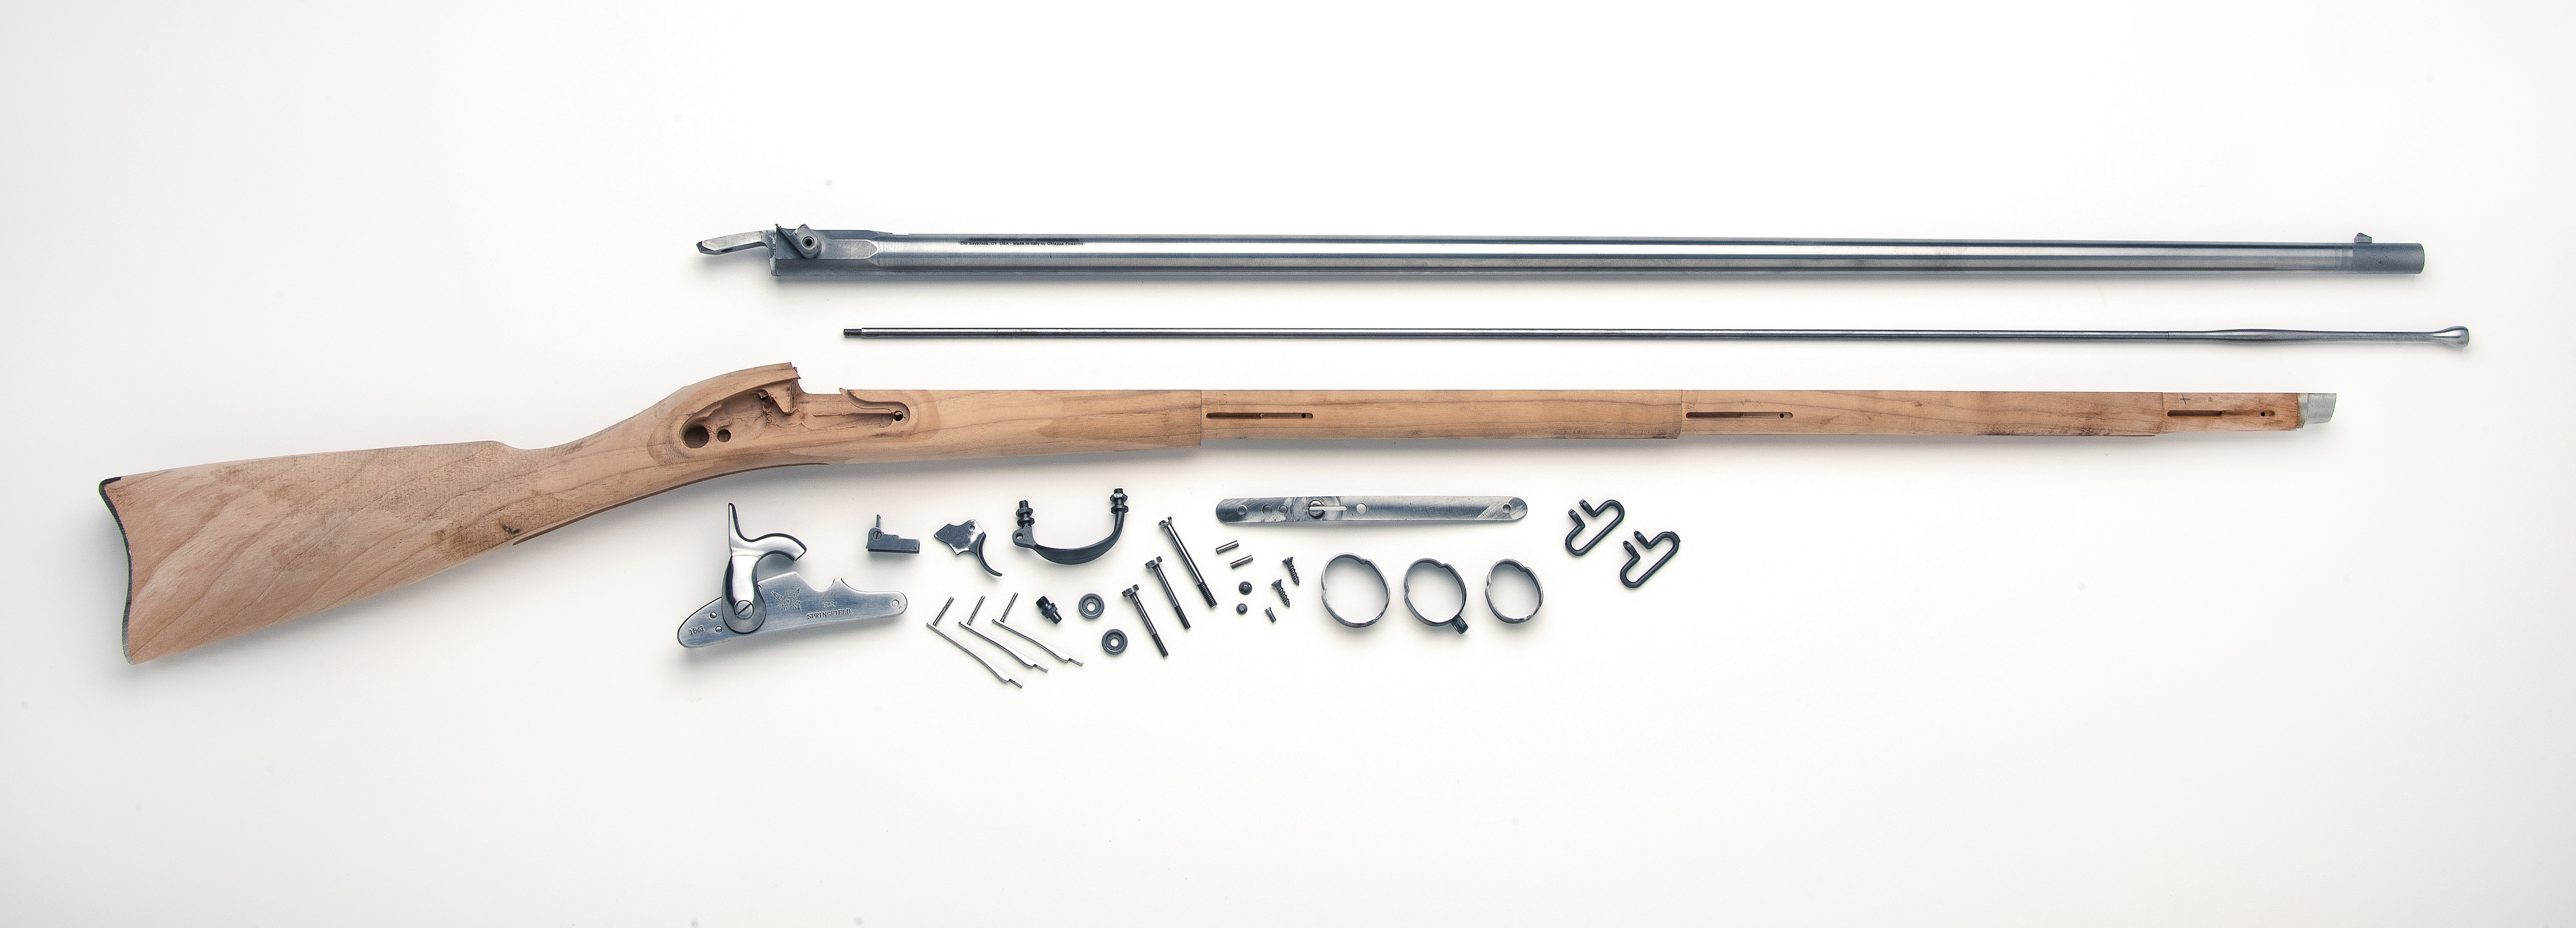 1861 Springfield Musket .58 Caliber Rifled Build It Yourself Kit KR6186100